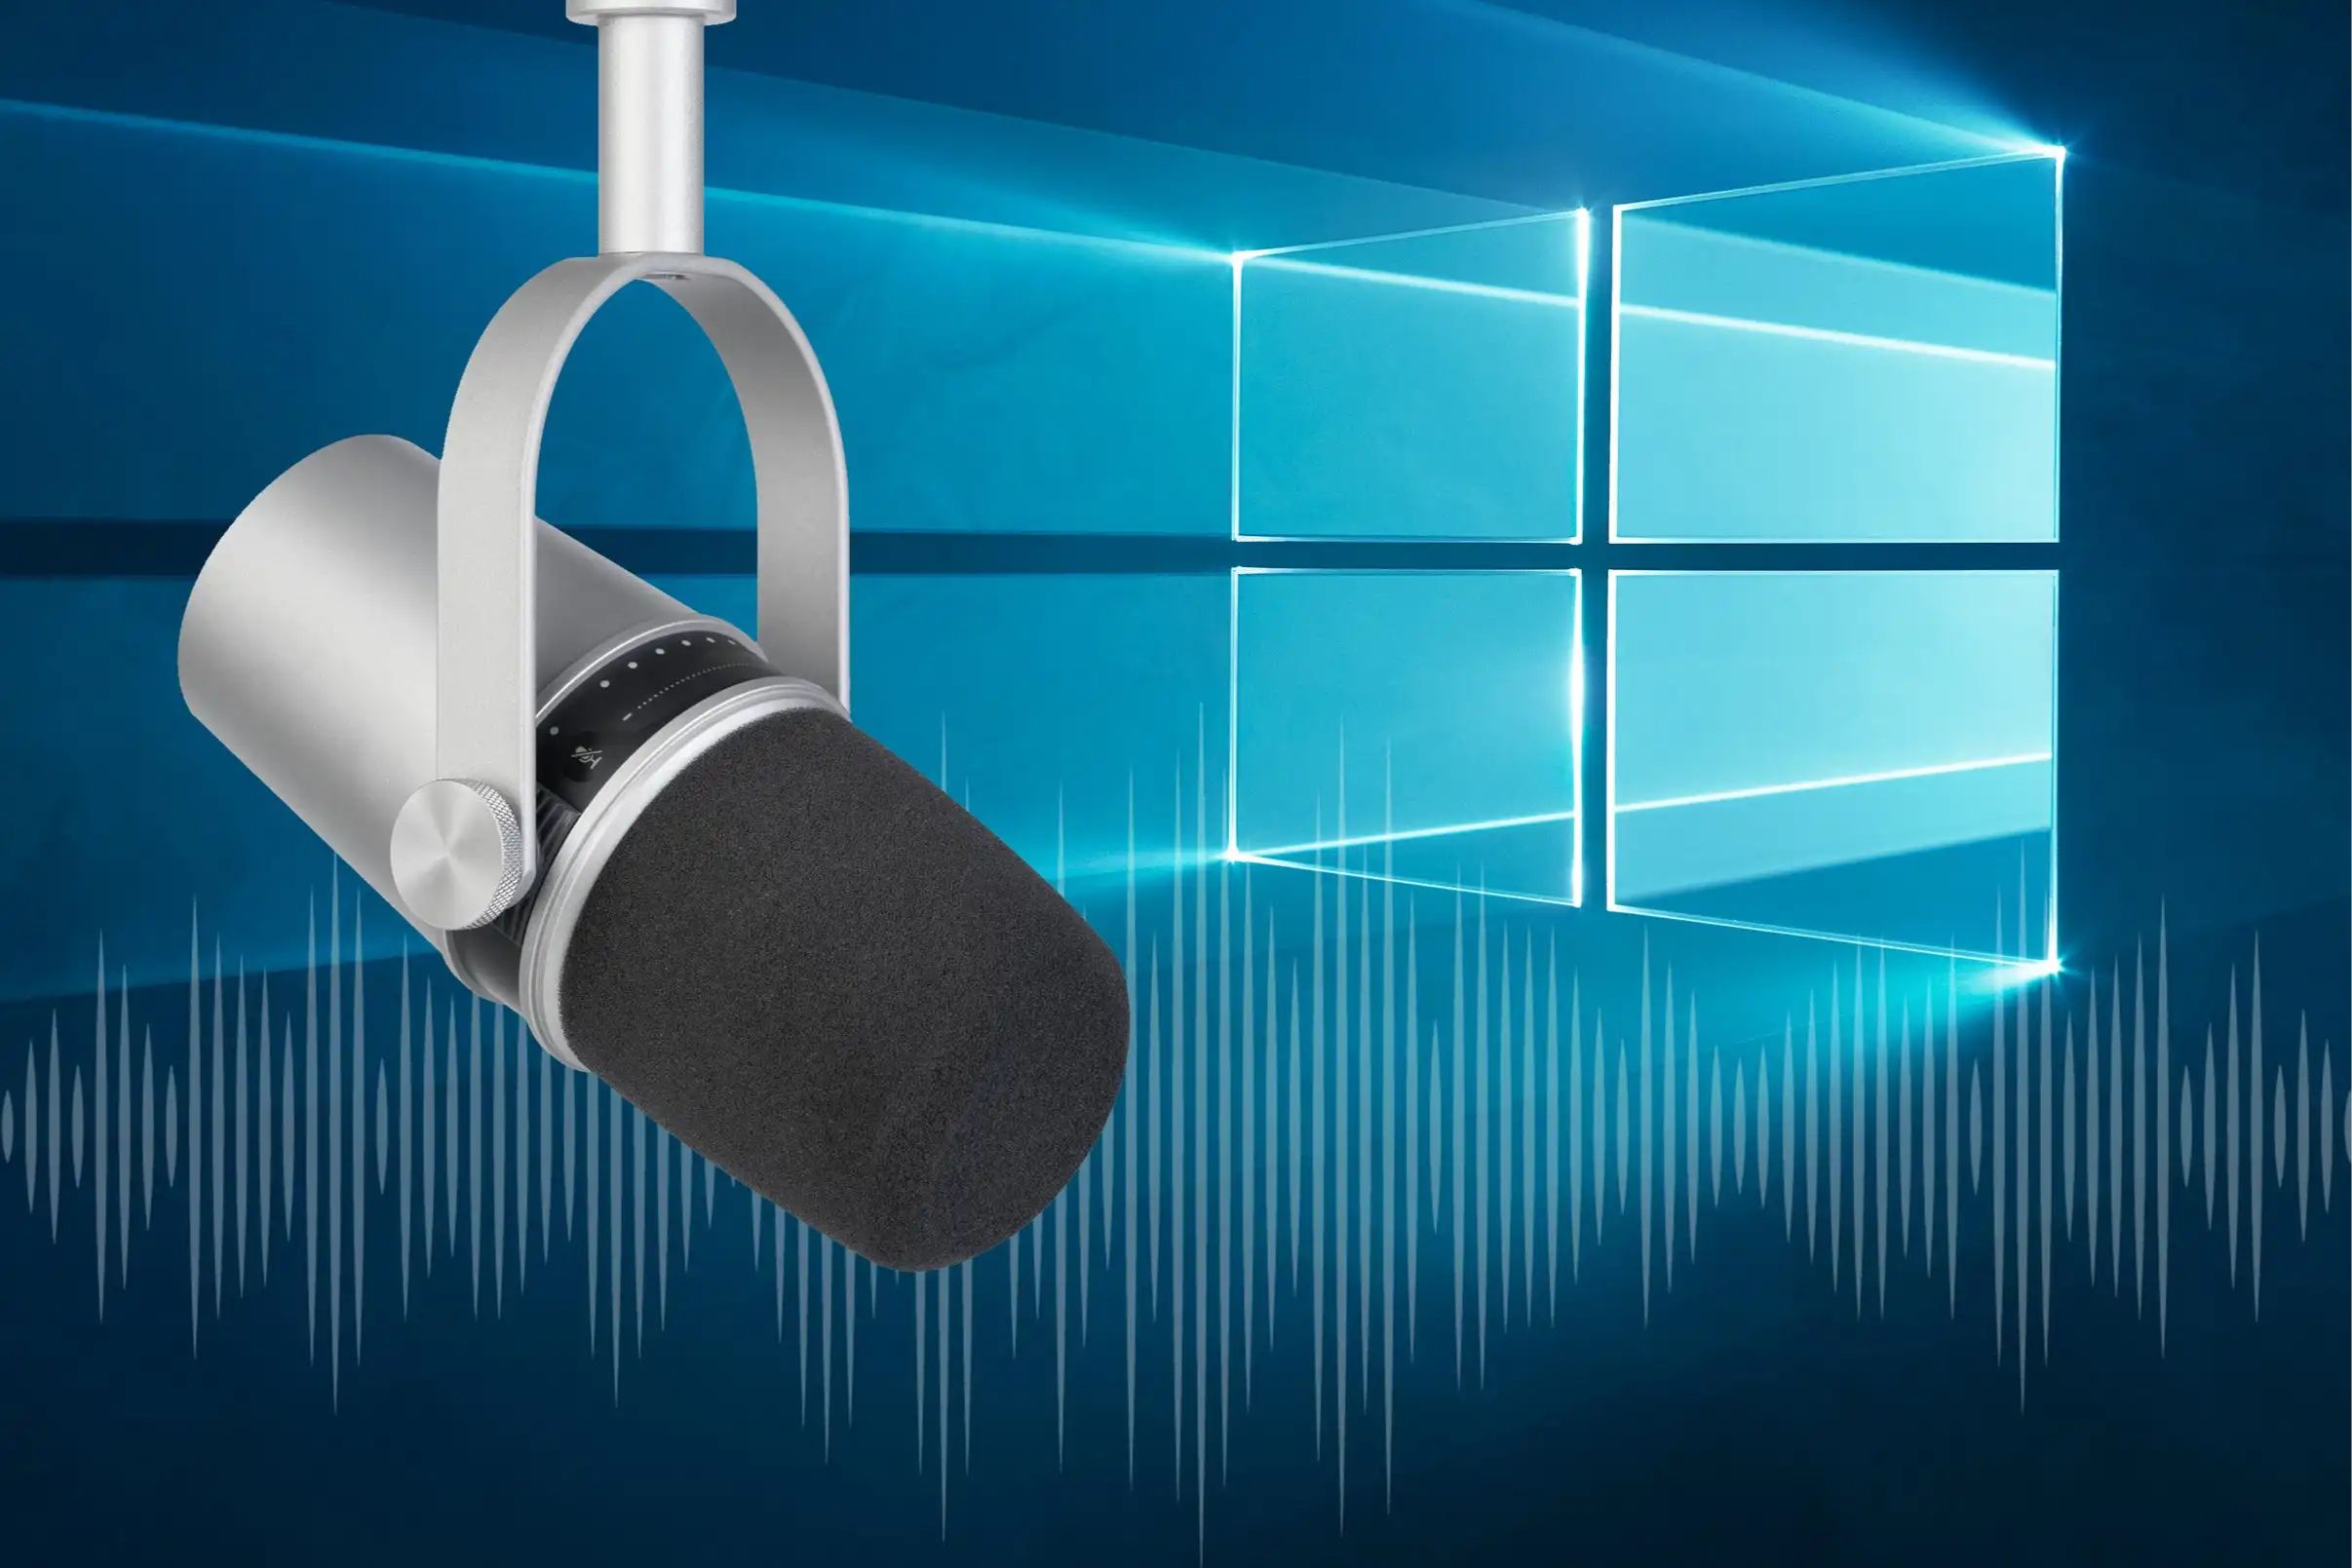 How To Increase USB Microphone Volume On Windows 10